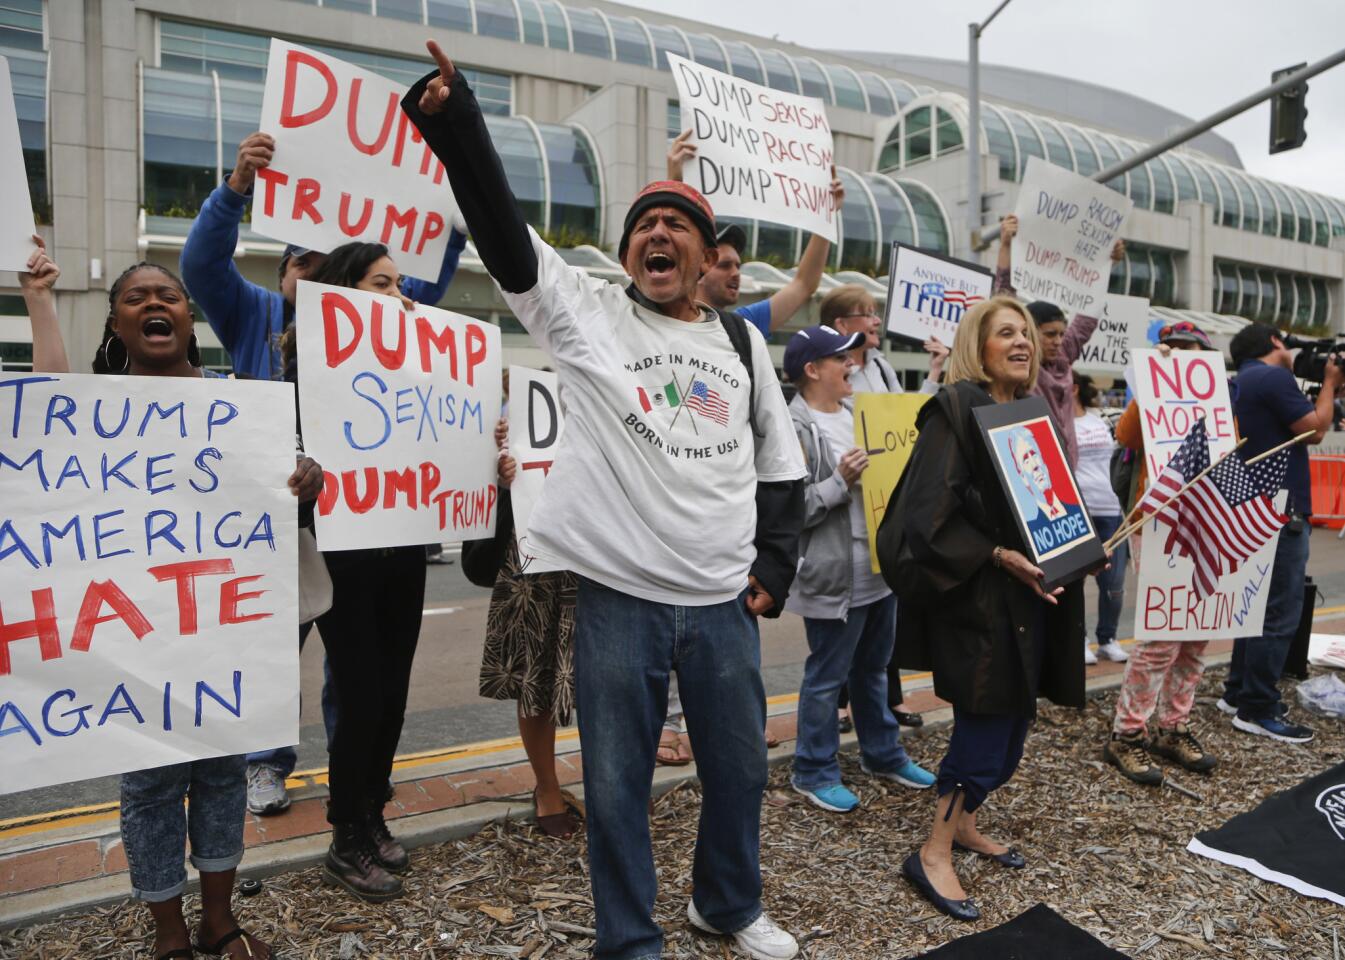 Protest outside Trump rally in San Diego